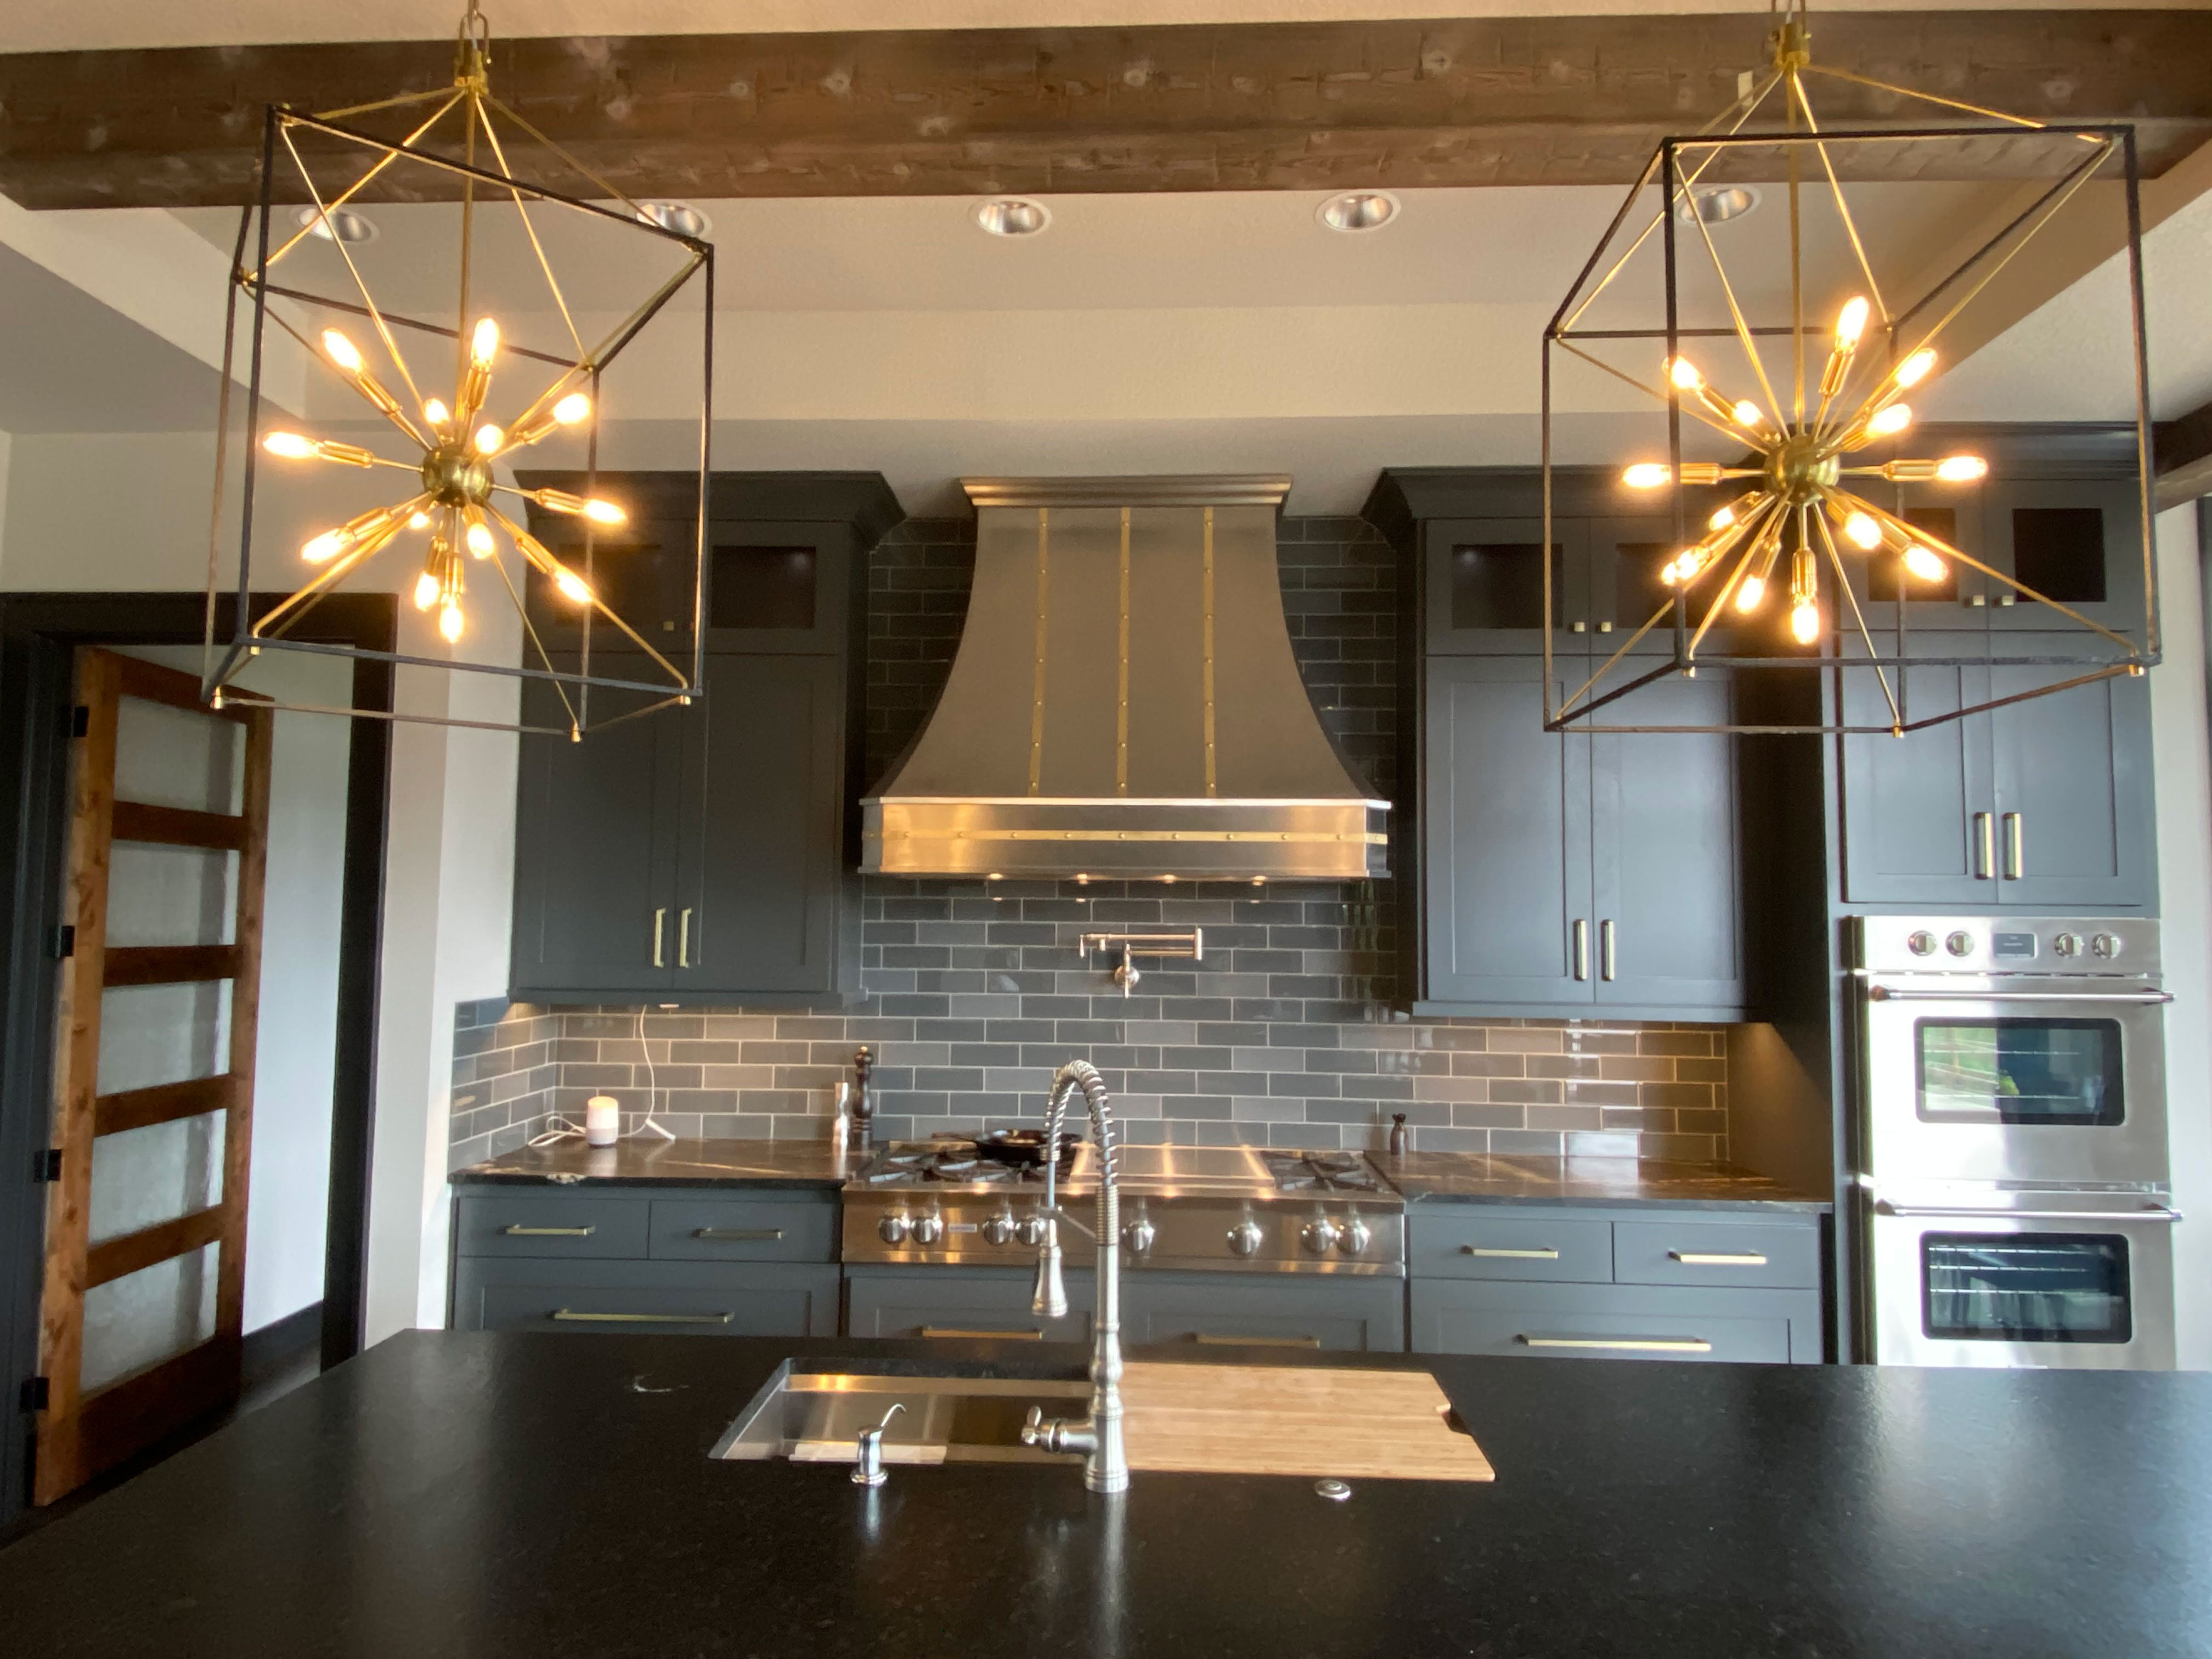 Stainless steel range hood with black and copper details in kitchen World CopperSmith